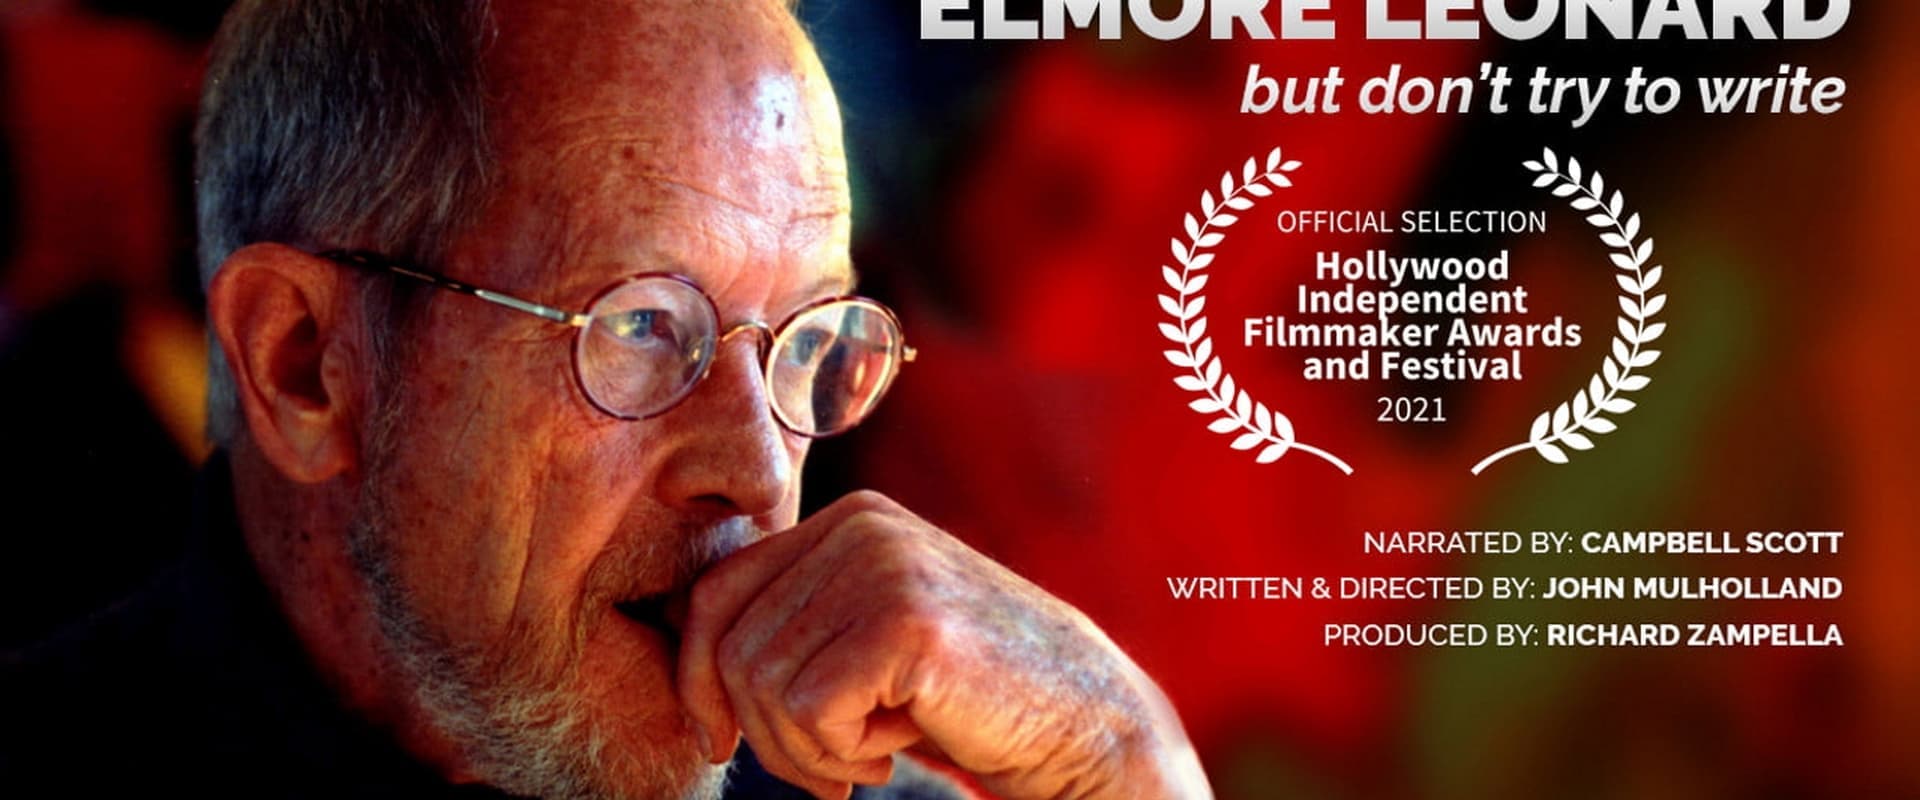 Elmore Leonard: "But Don't Try to Write"